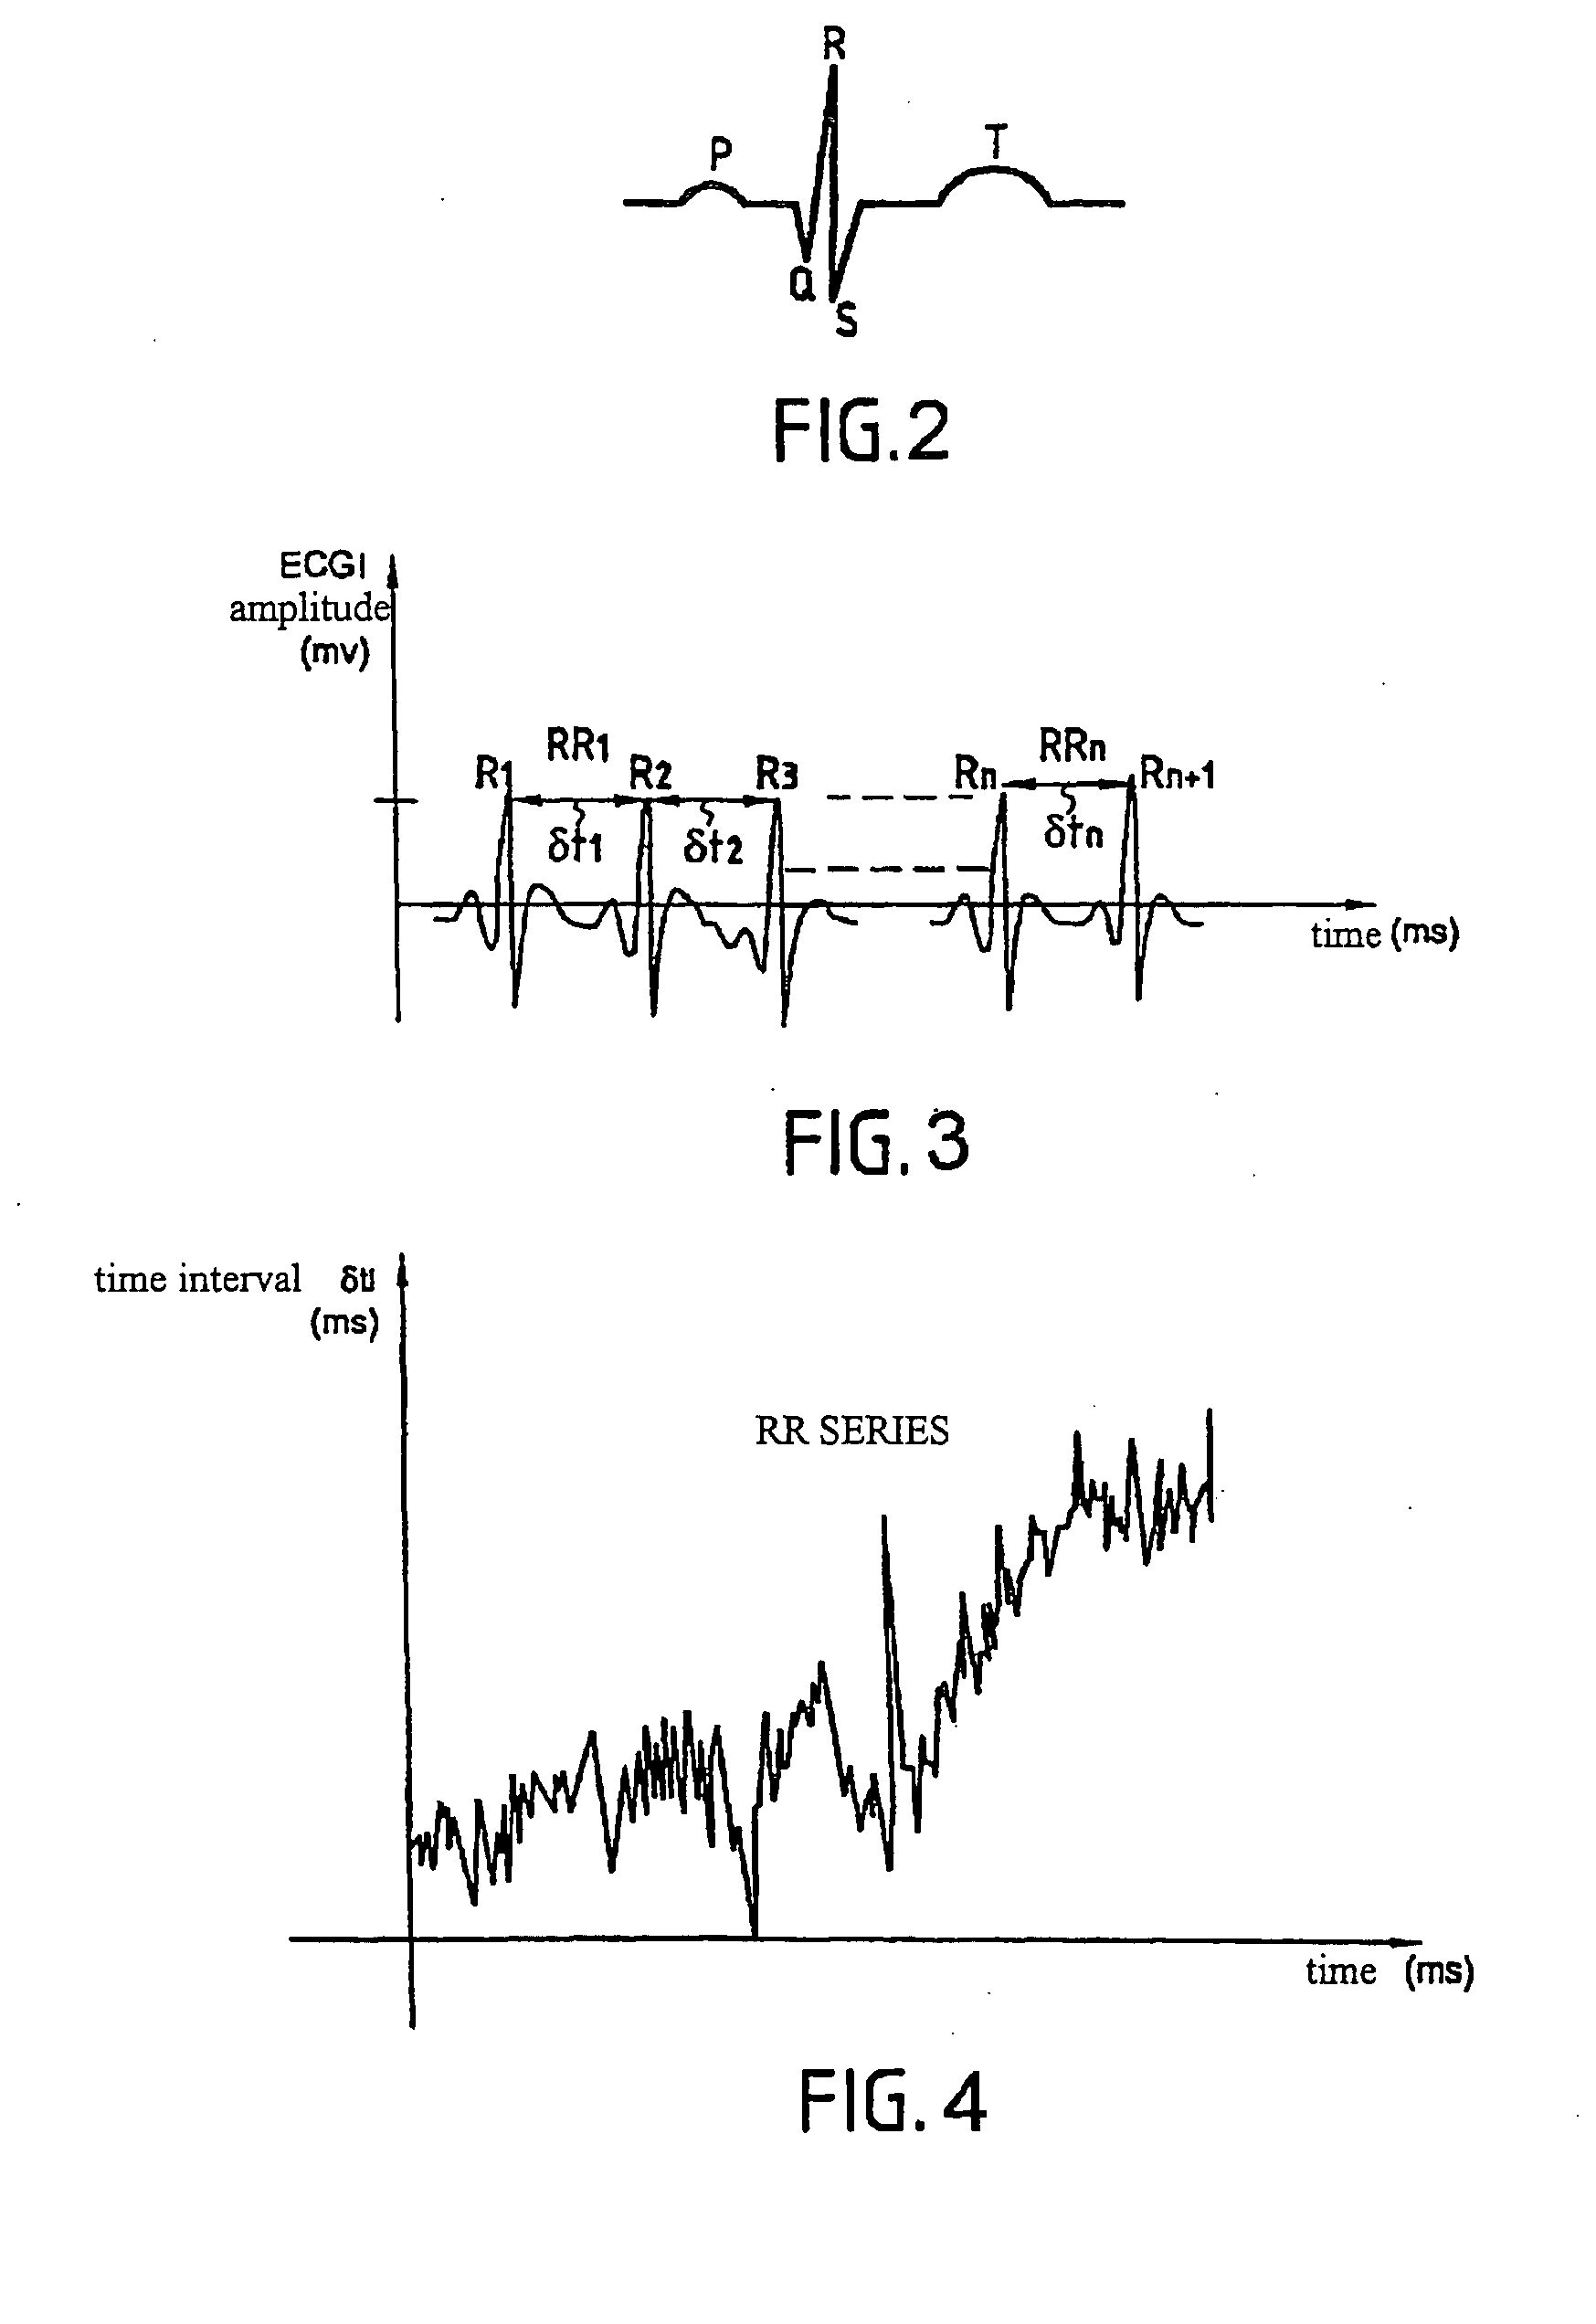 Method For Processing A Series Of Cardiac Rhythm Signals (Rr) And The Use Thereof For Analysing A Cardiac Rhythm Variability, In Particular For Assessing A Patient's Pain Or Stress